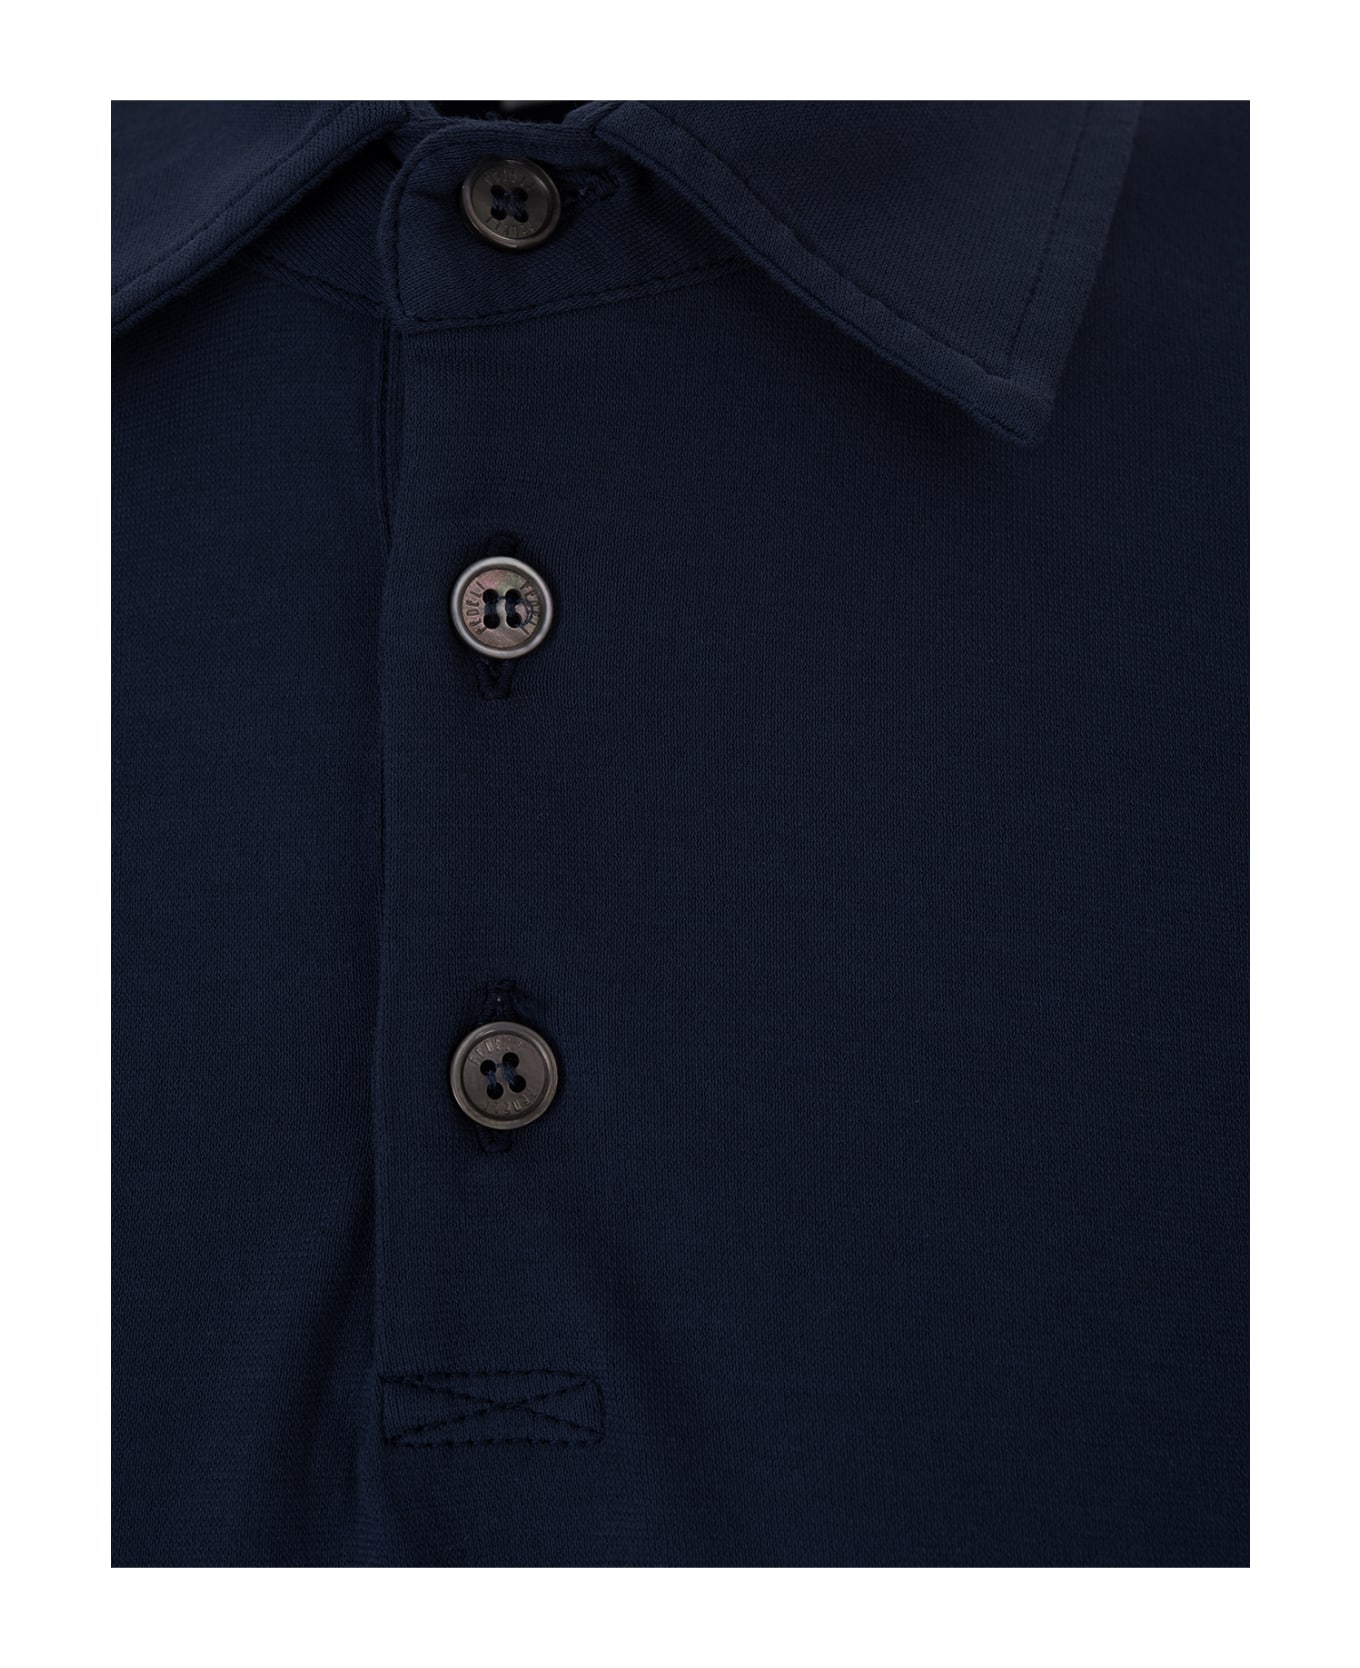 Fedeli Short-sleeved Polo Shirt In Navy Blue Cotton - Blue